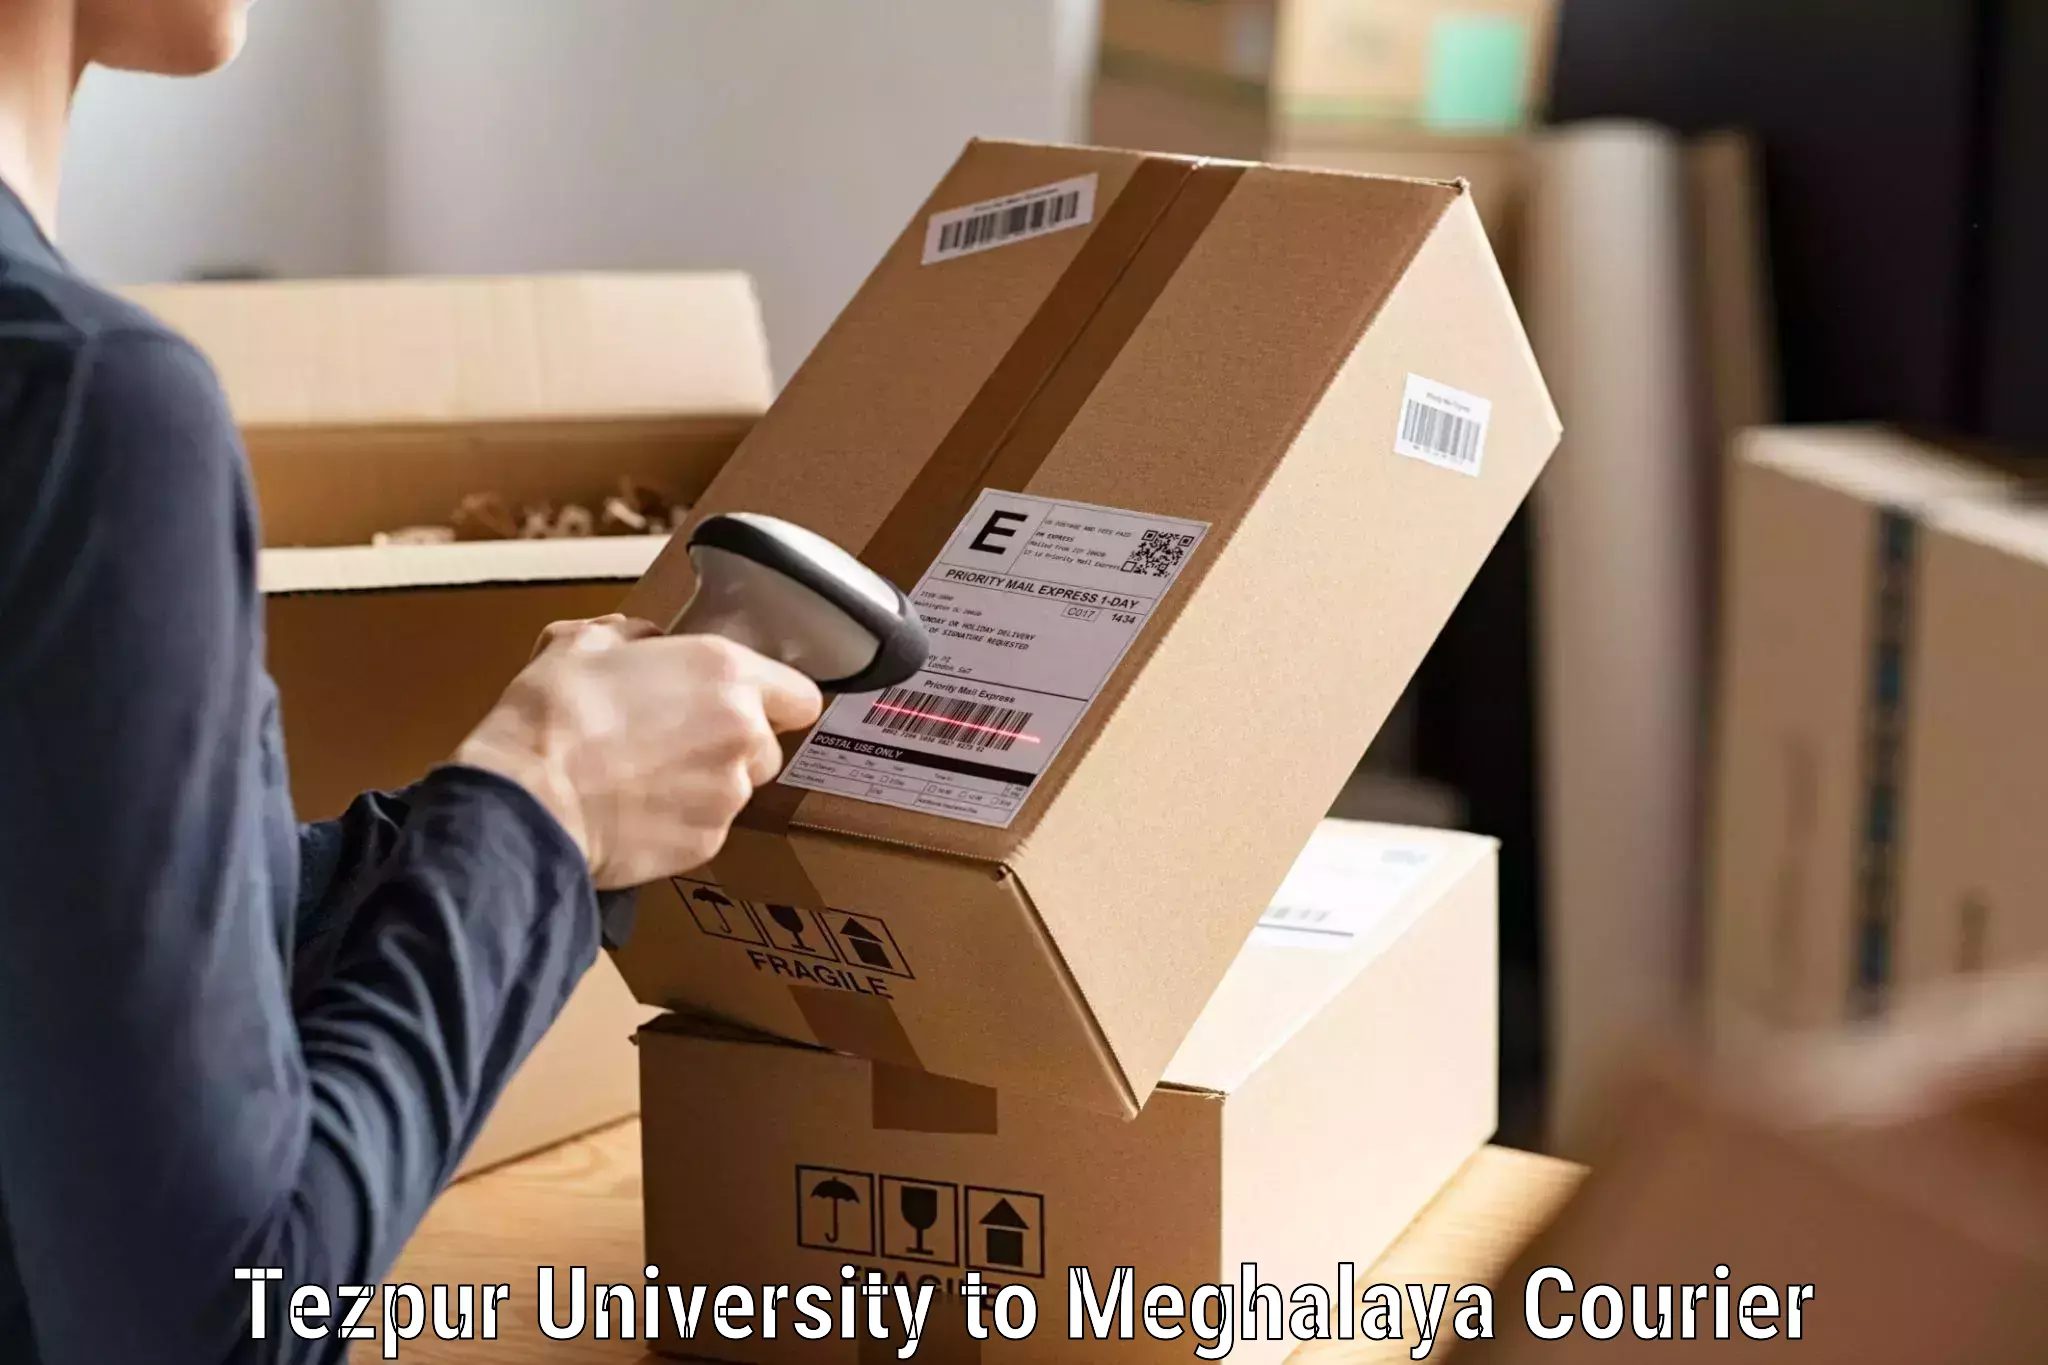 On-call courier service Tezpur University to Shillong